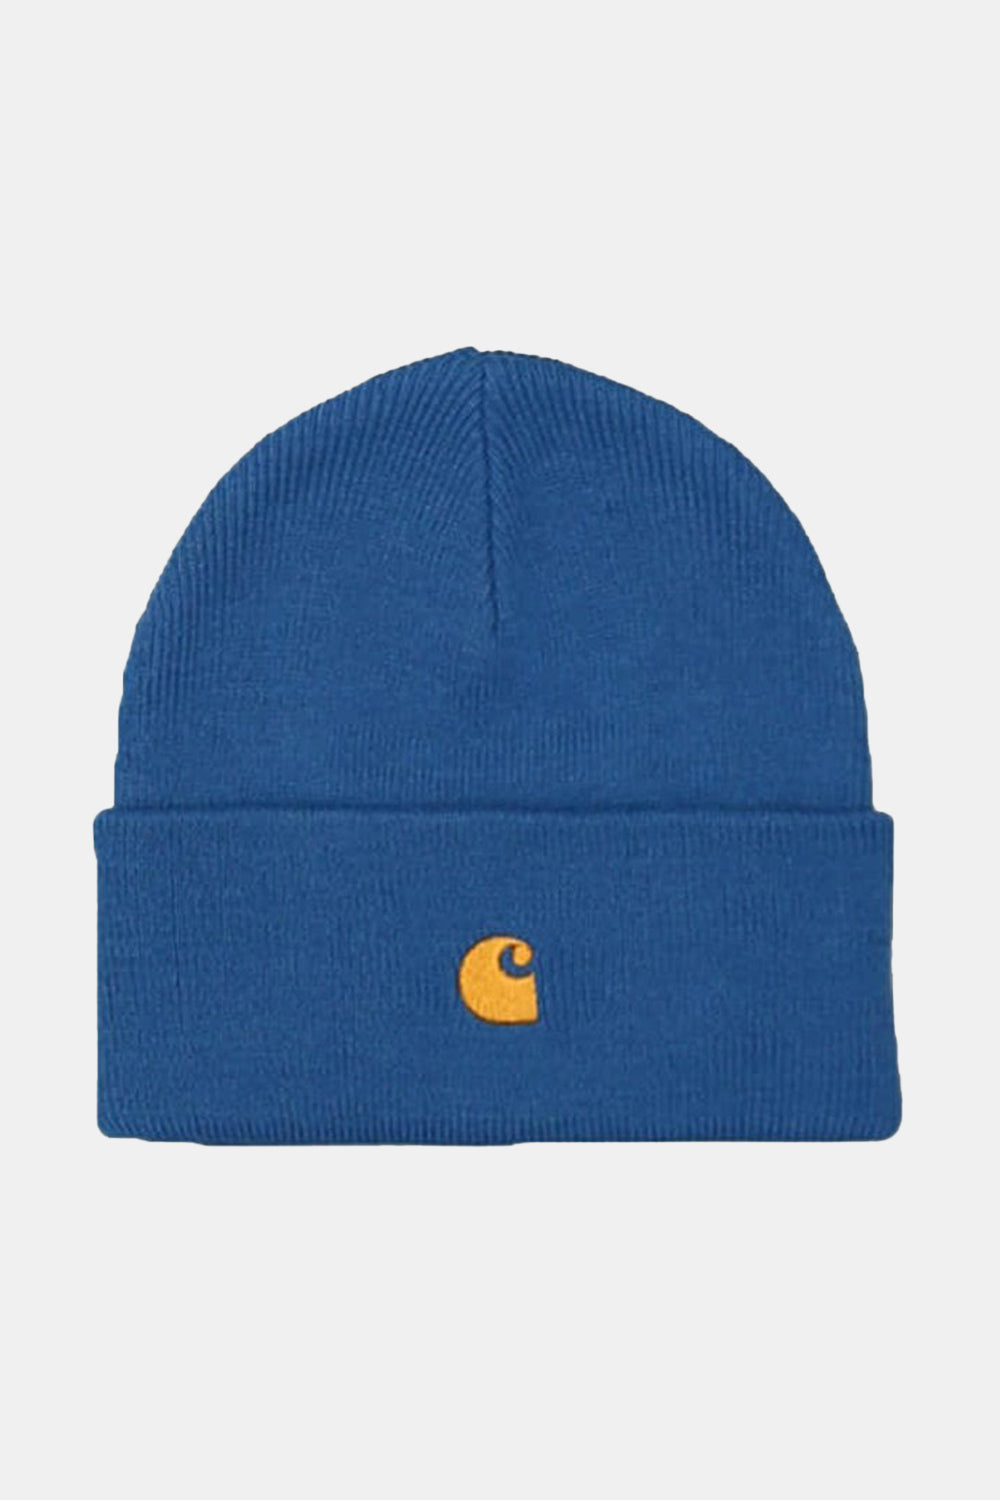 Carhartt WIP Chase Beanie (Skydive Blue & Gold) | Number Six